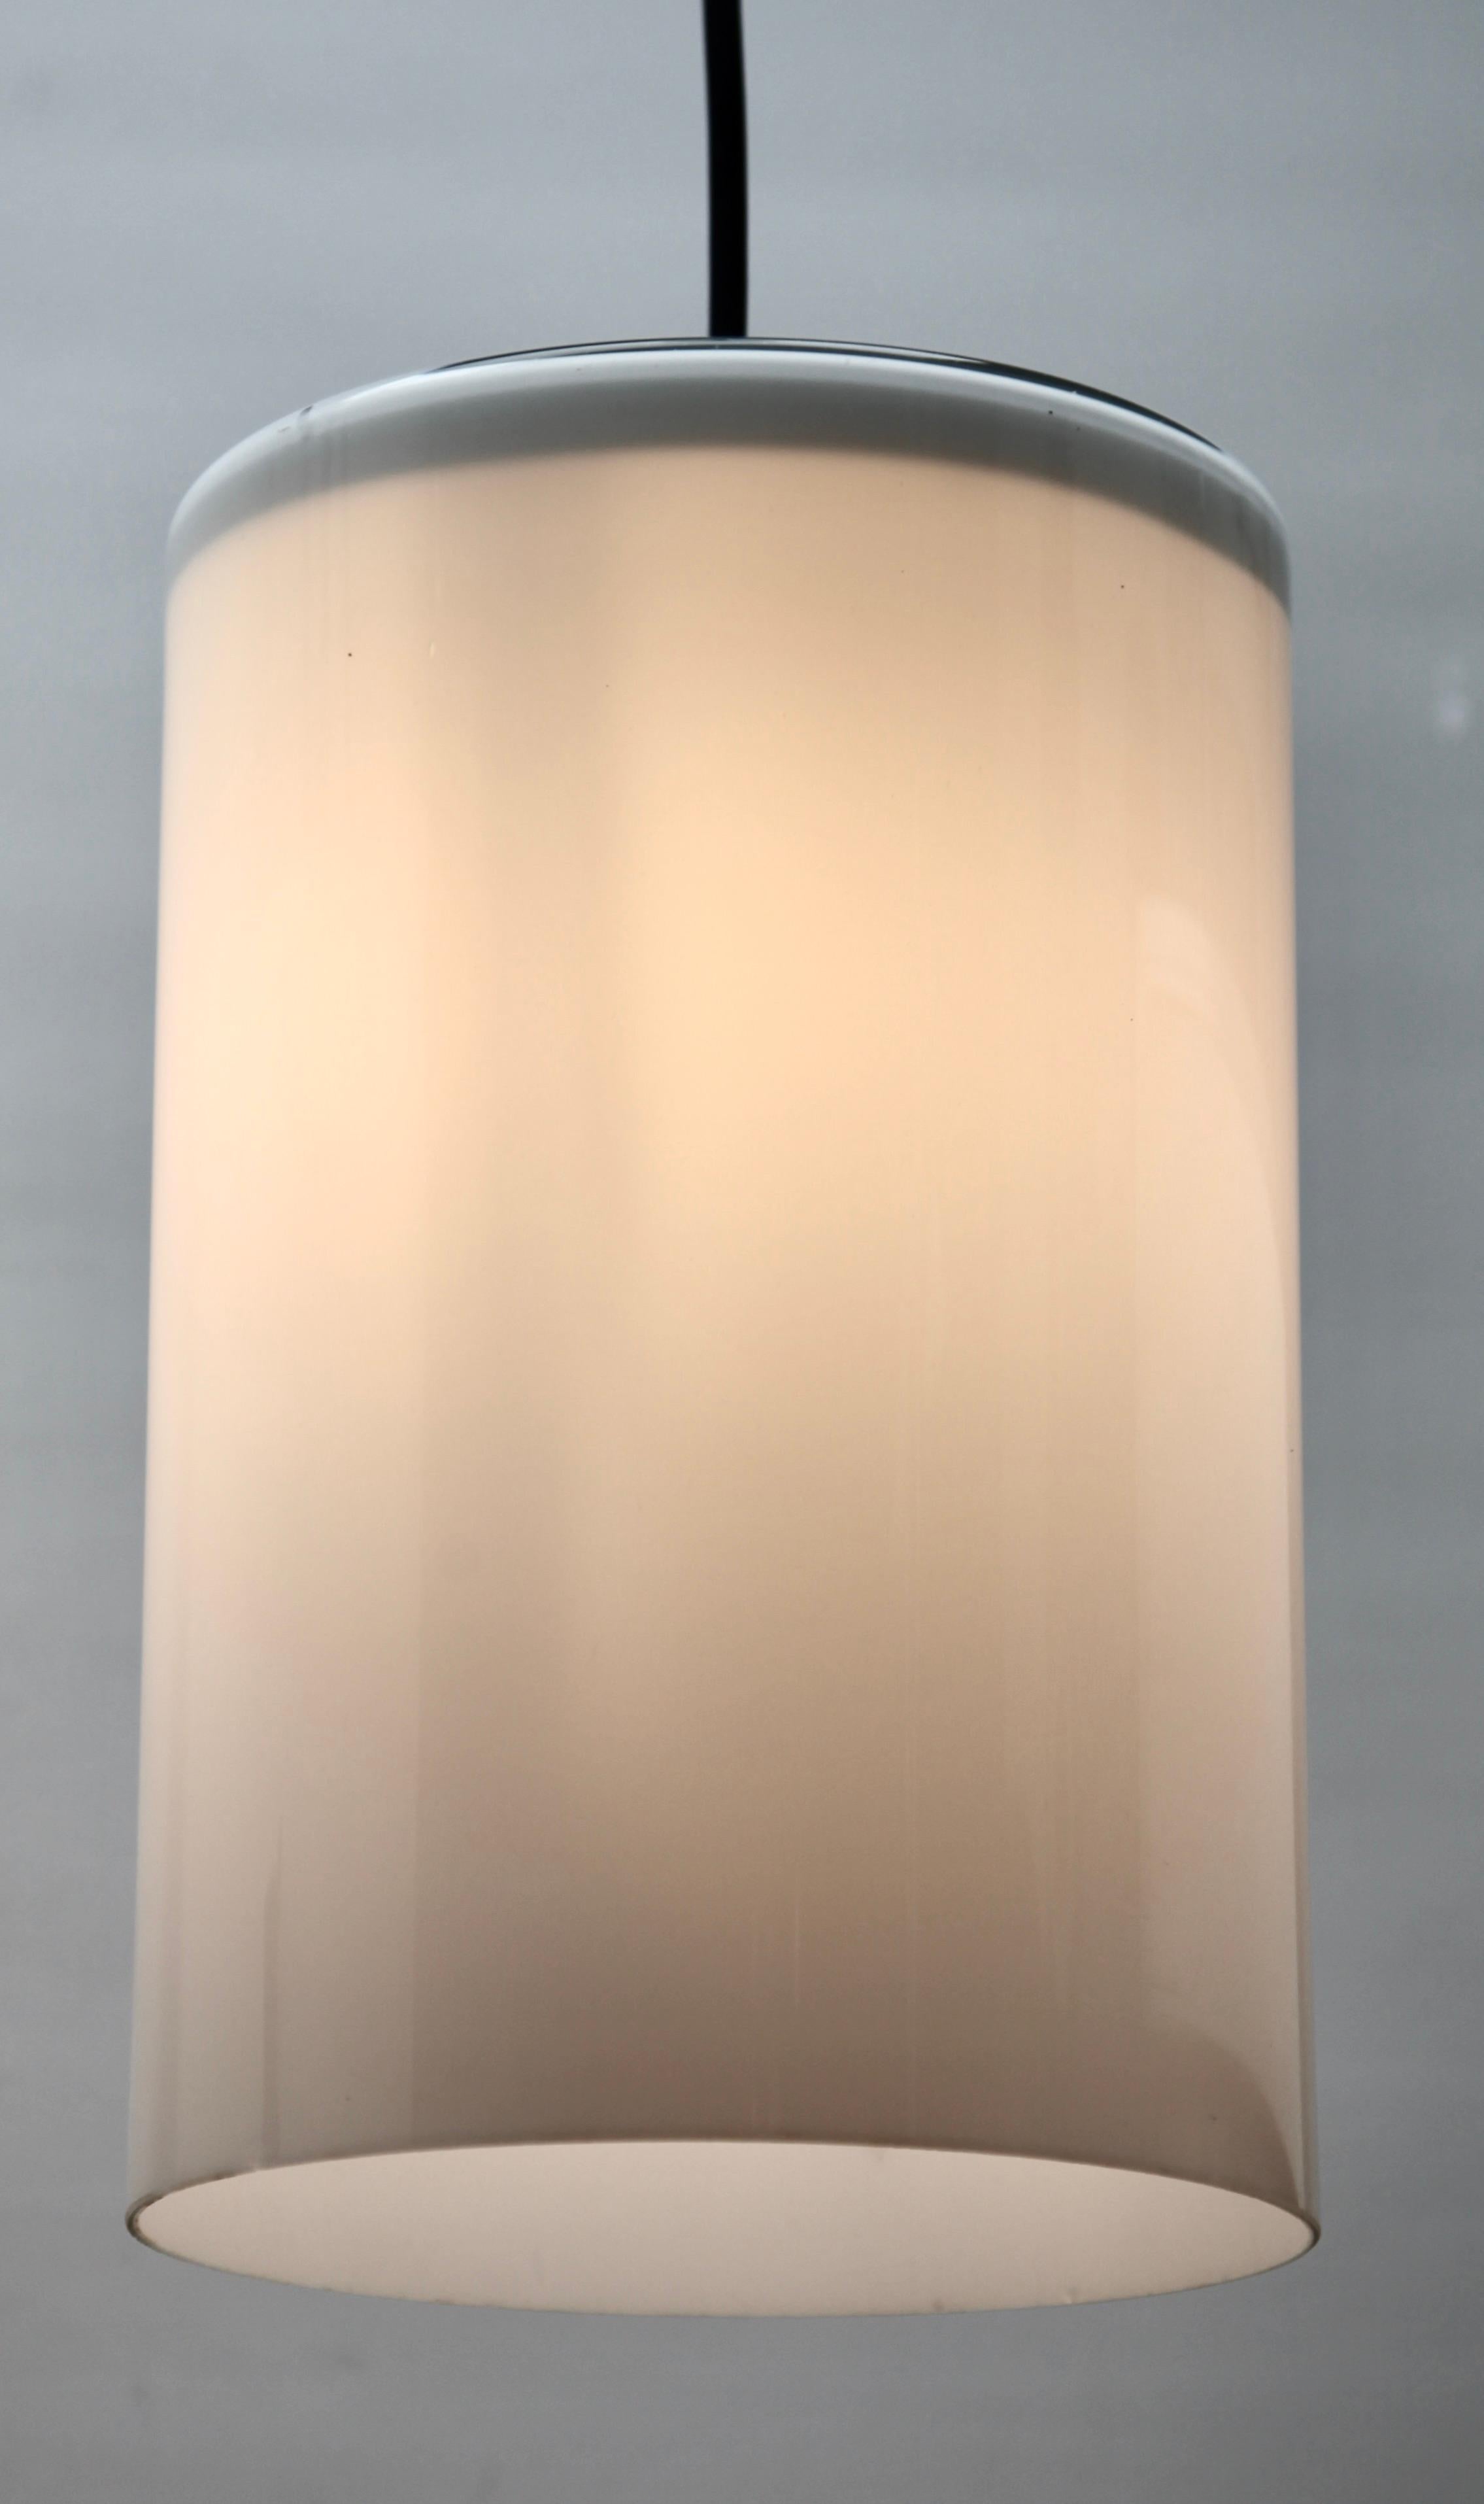 Metalwork Pendant Lamp with a Cylinder Shape Opaline Shade, 1930s, Netherlands For Sale